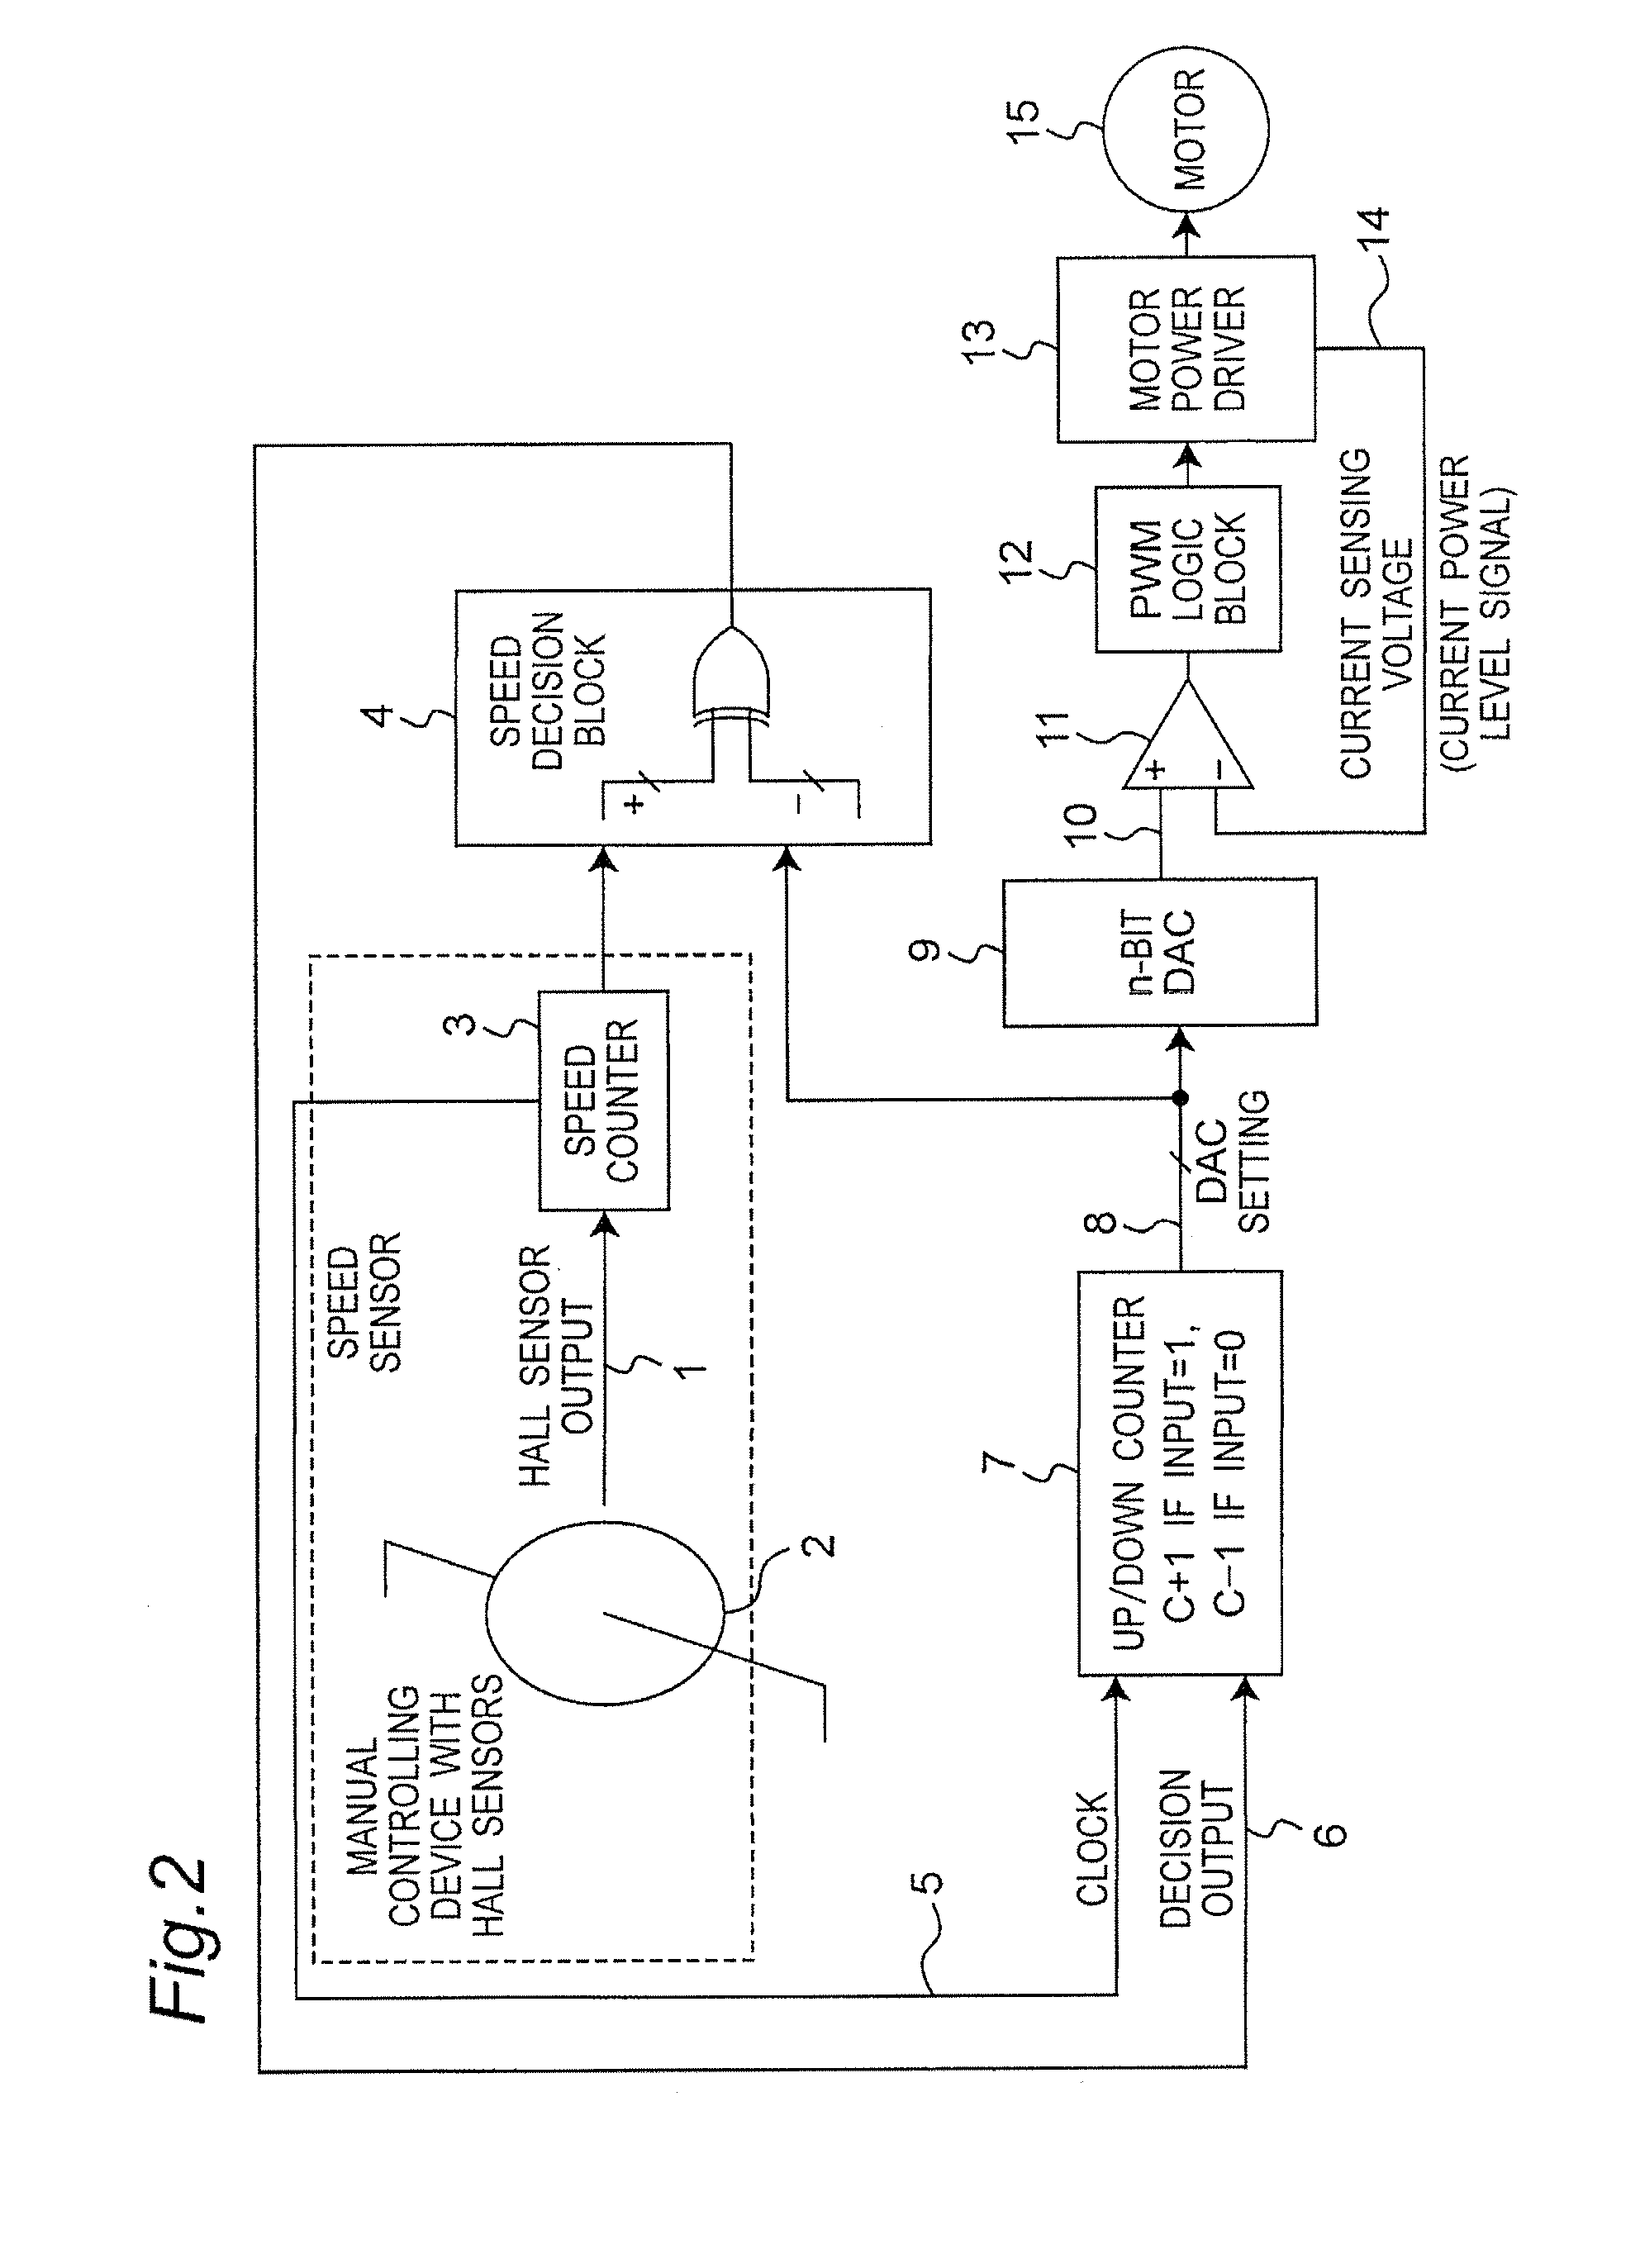 Electric power-assist system for manually-operated vehicle